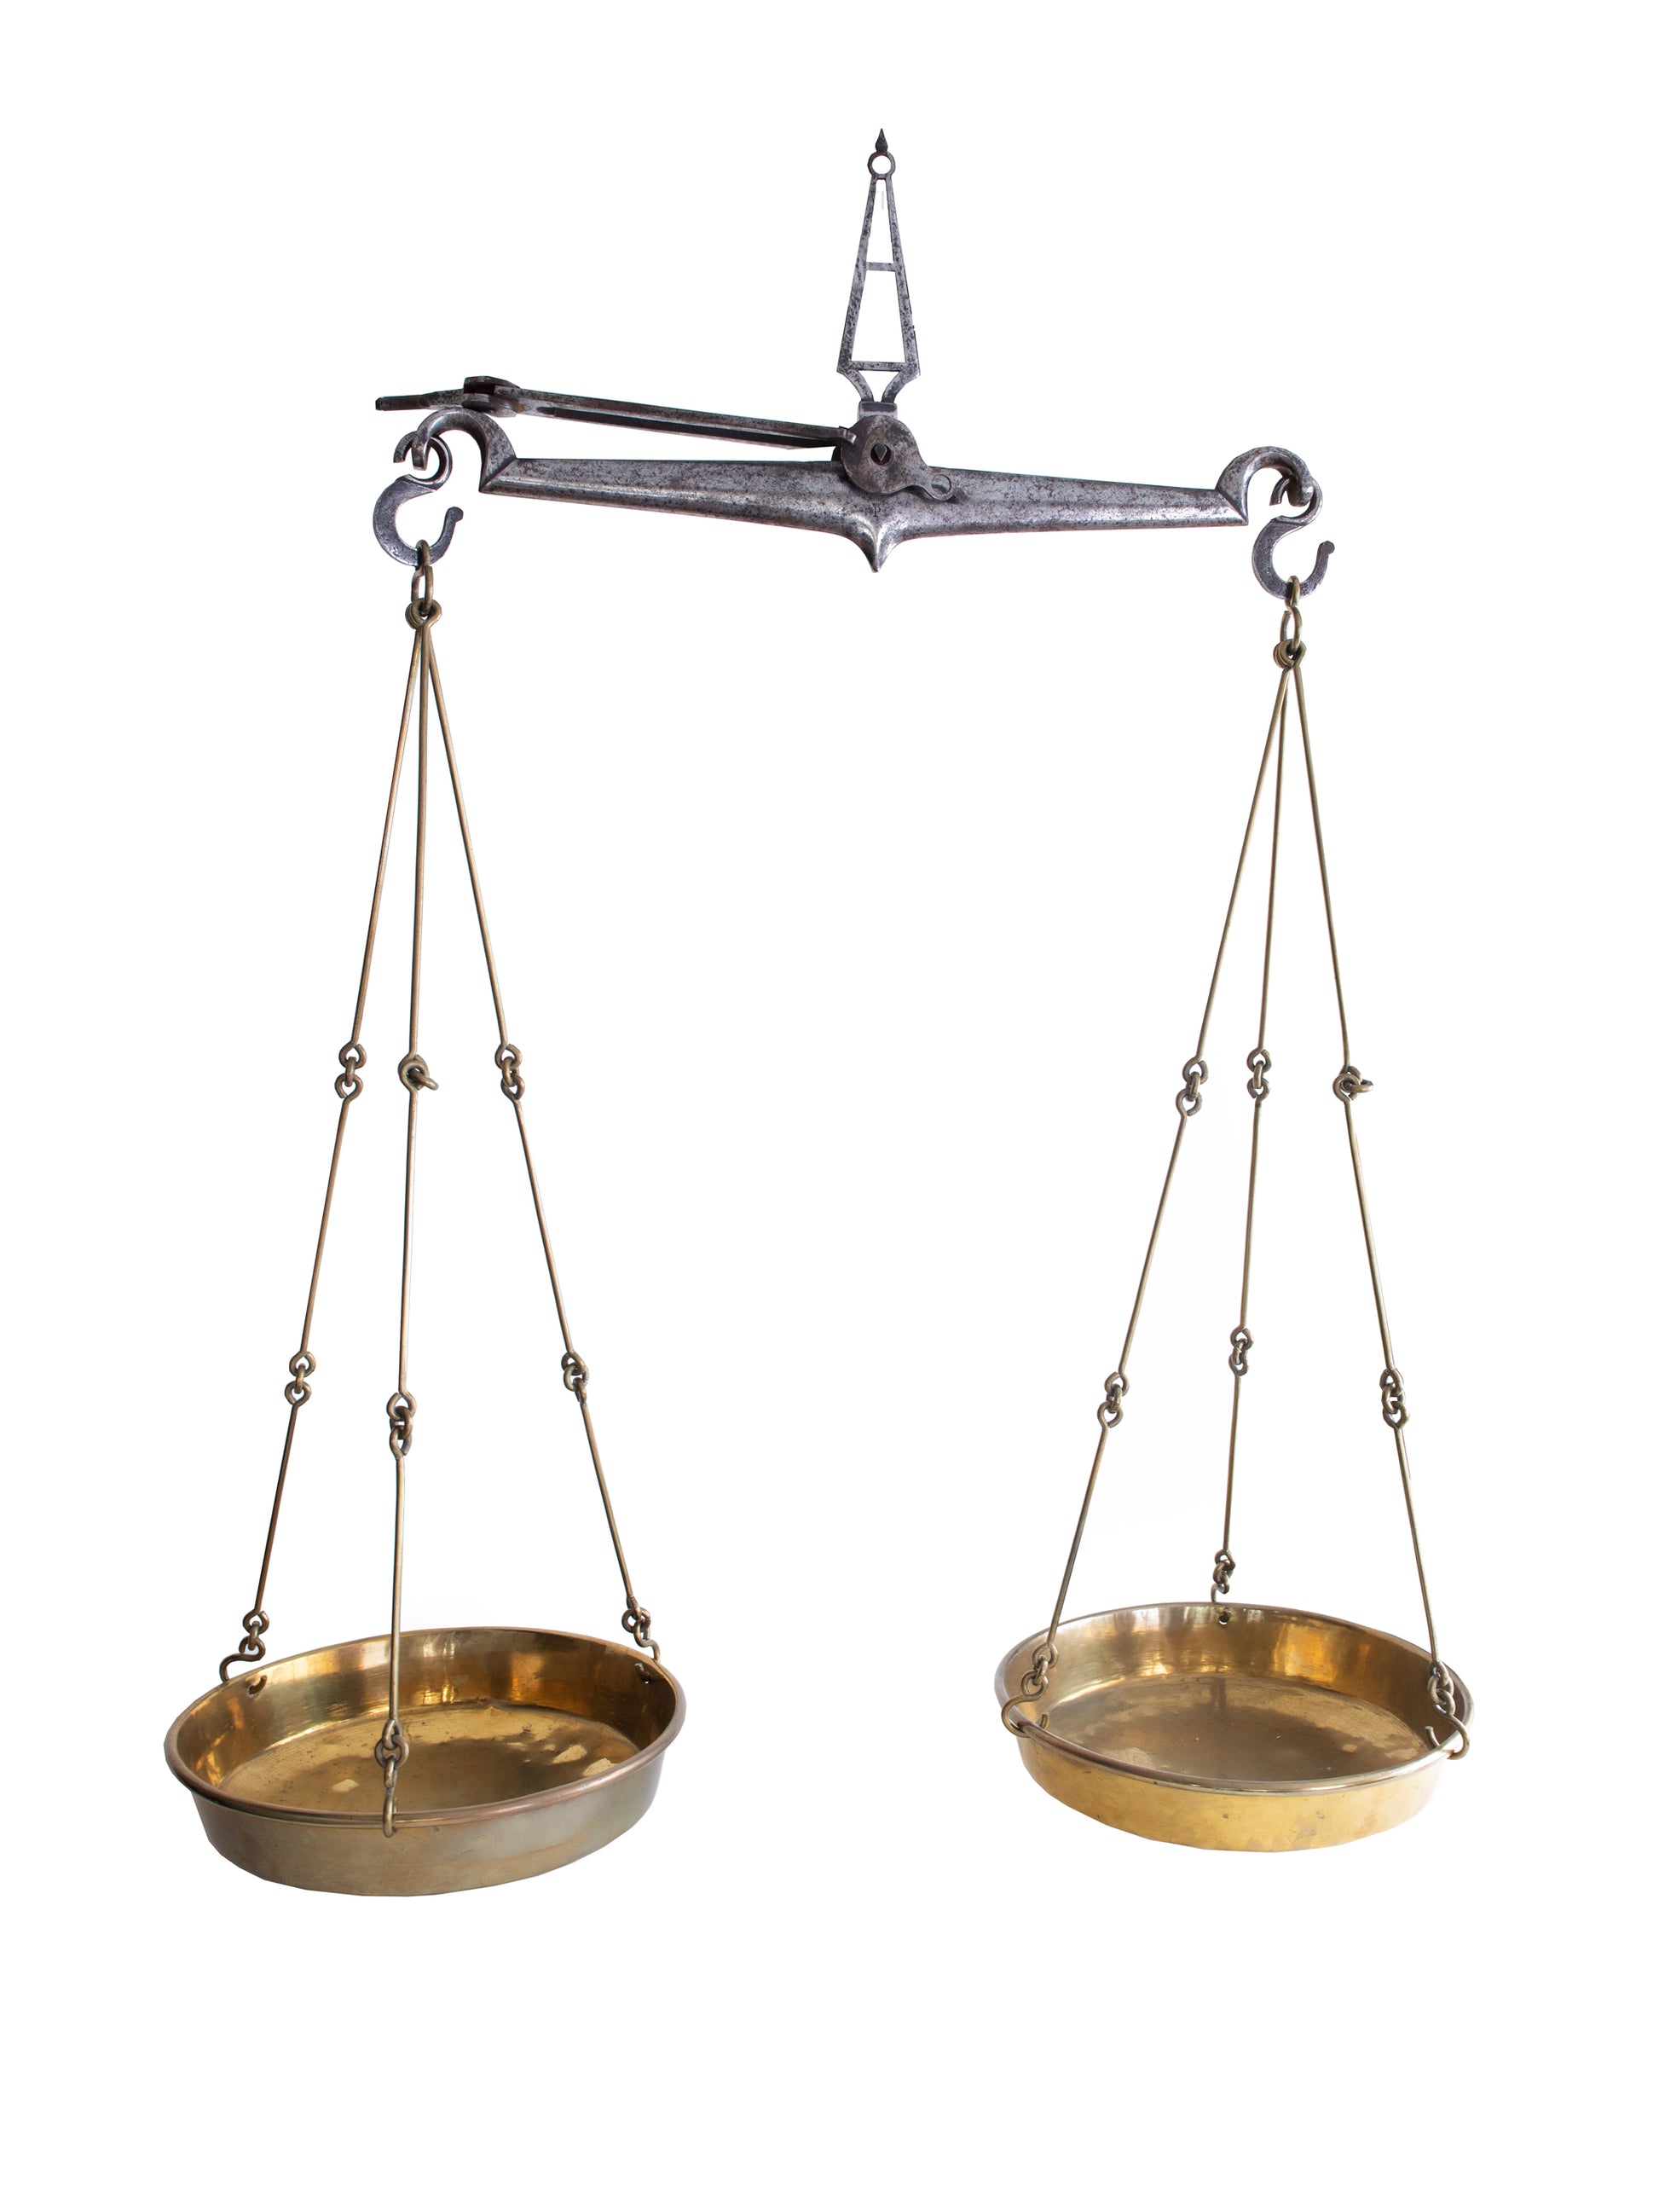 Shop the Vintage 1920s French Hanging Balance Scales at Weston Table